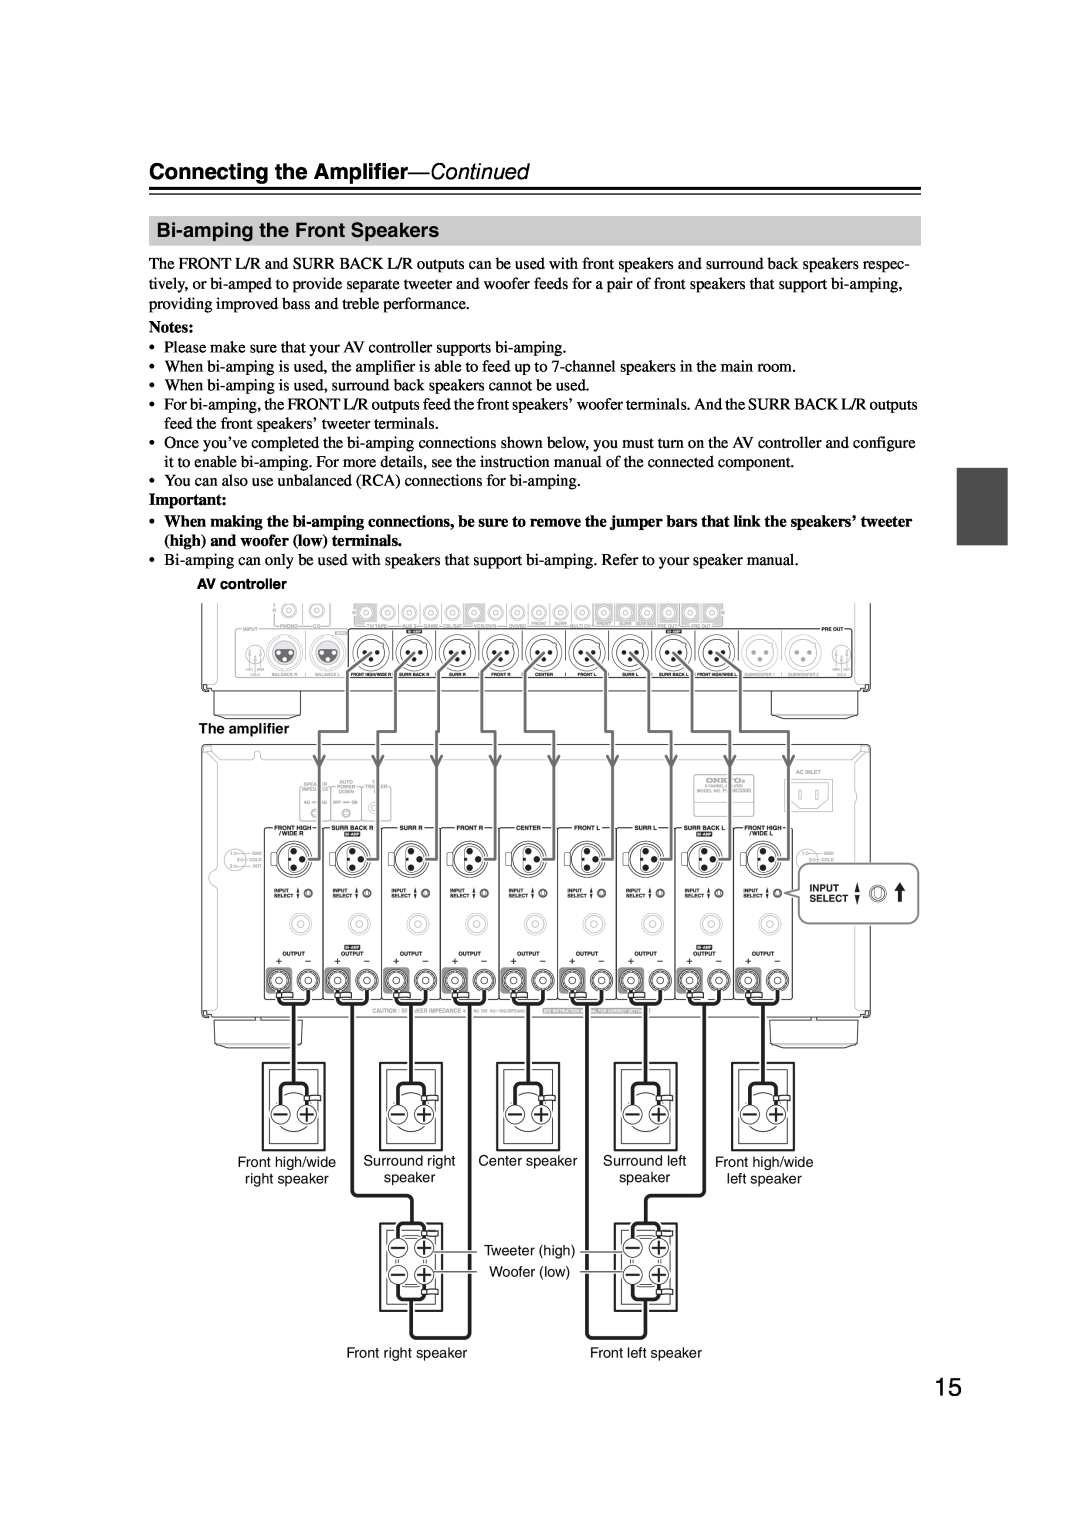 Onkyo PA-MC5500 instruction manual Bi-ampingthe Front Speakers, Connecting the Amplifier-Continued 